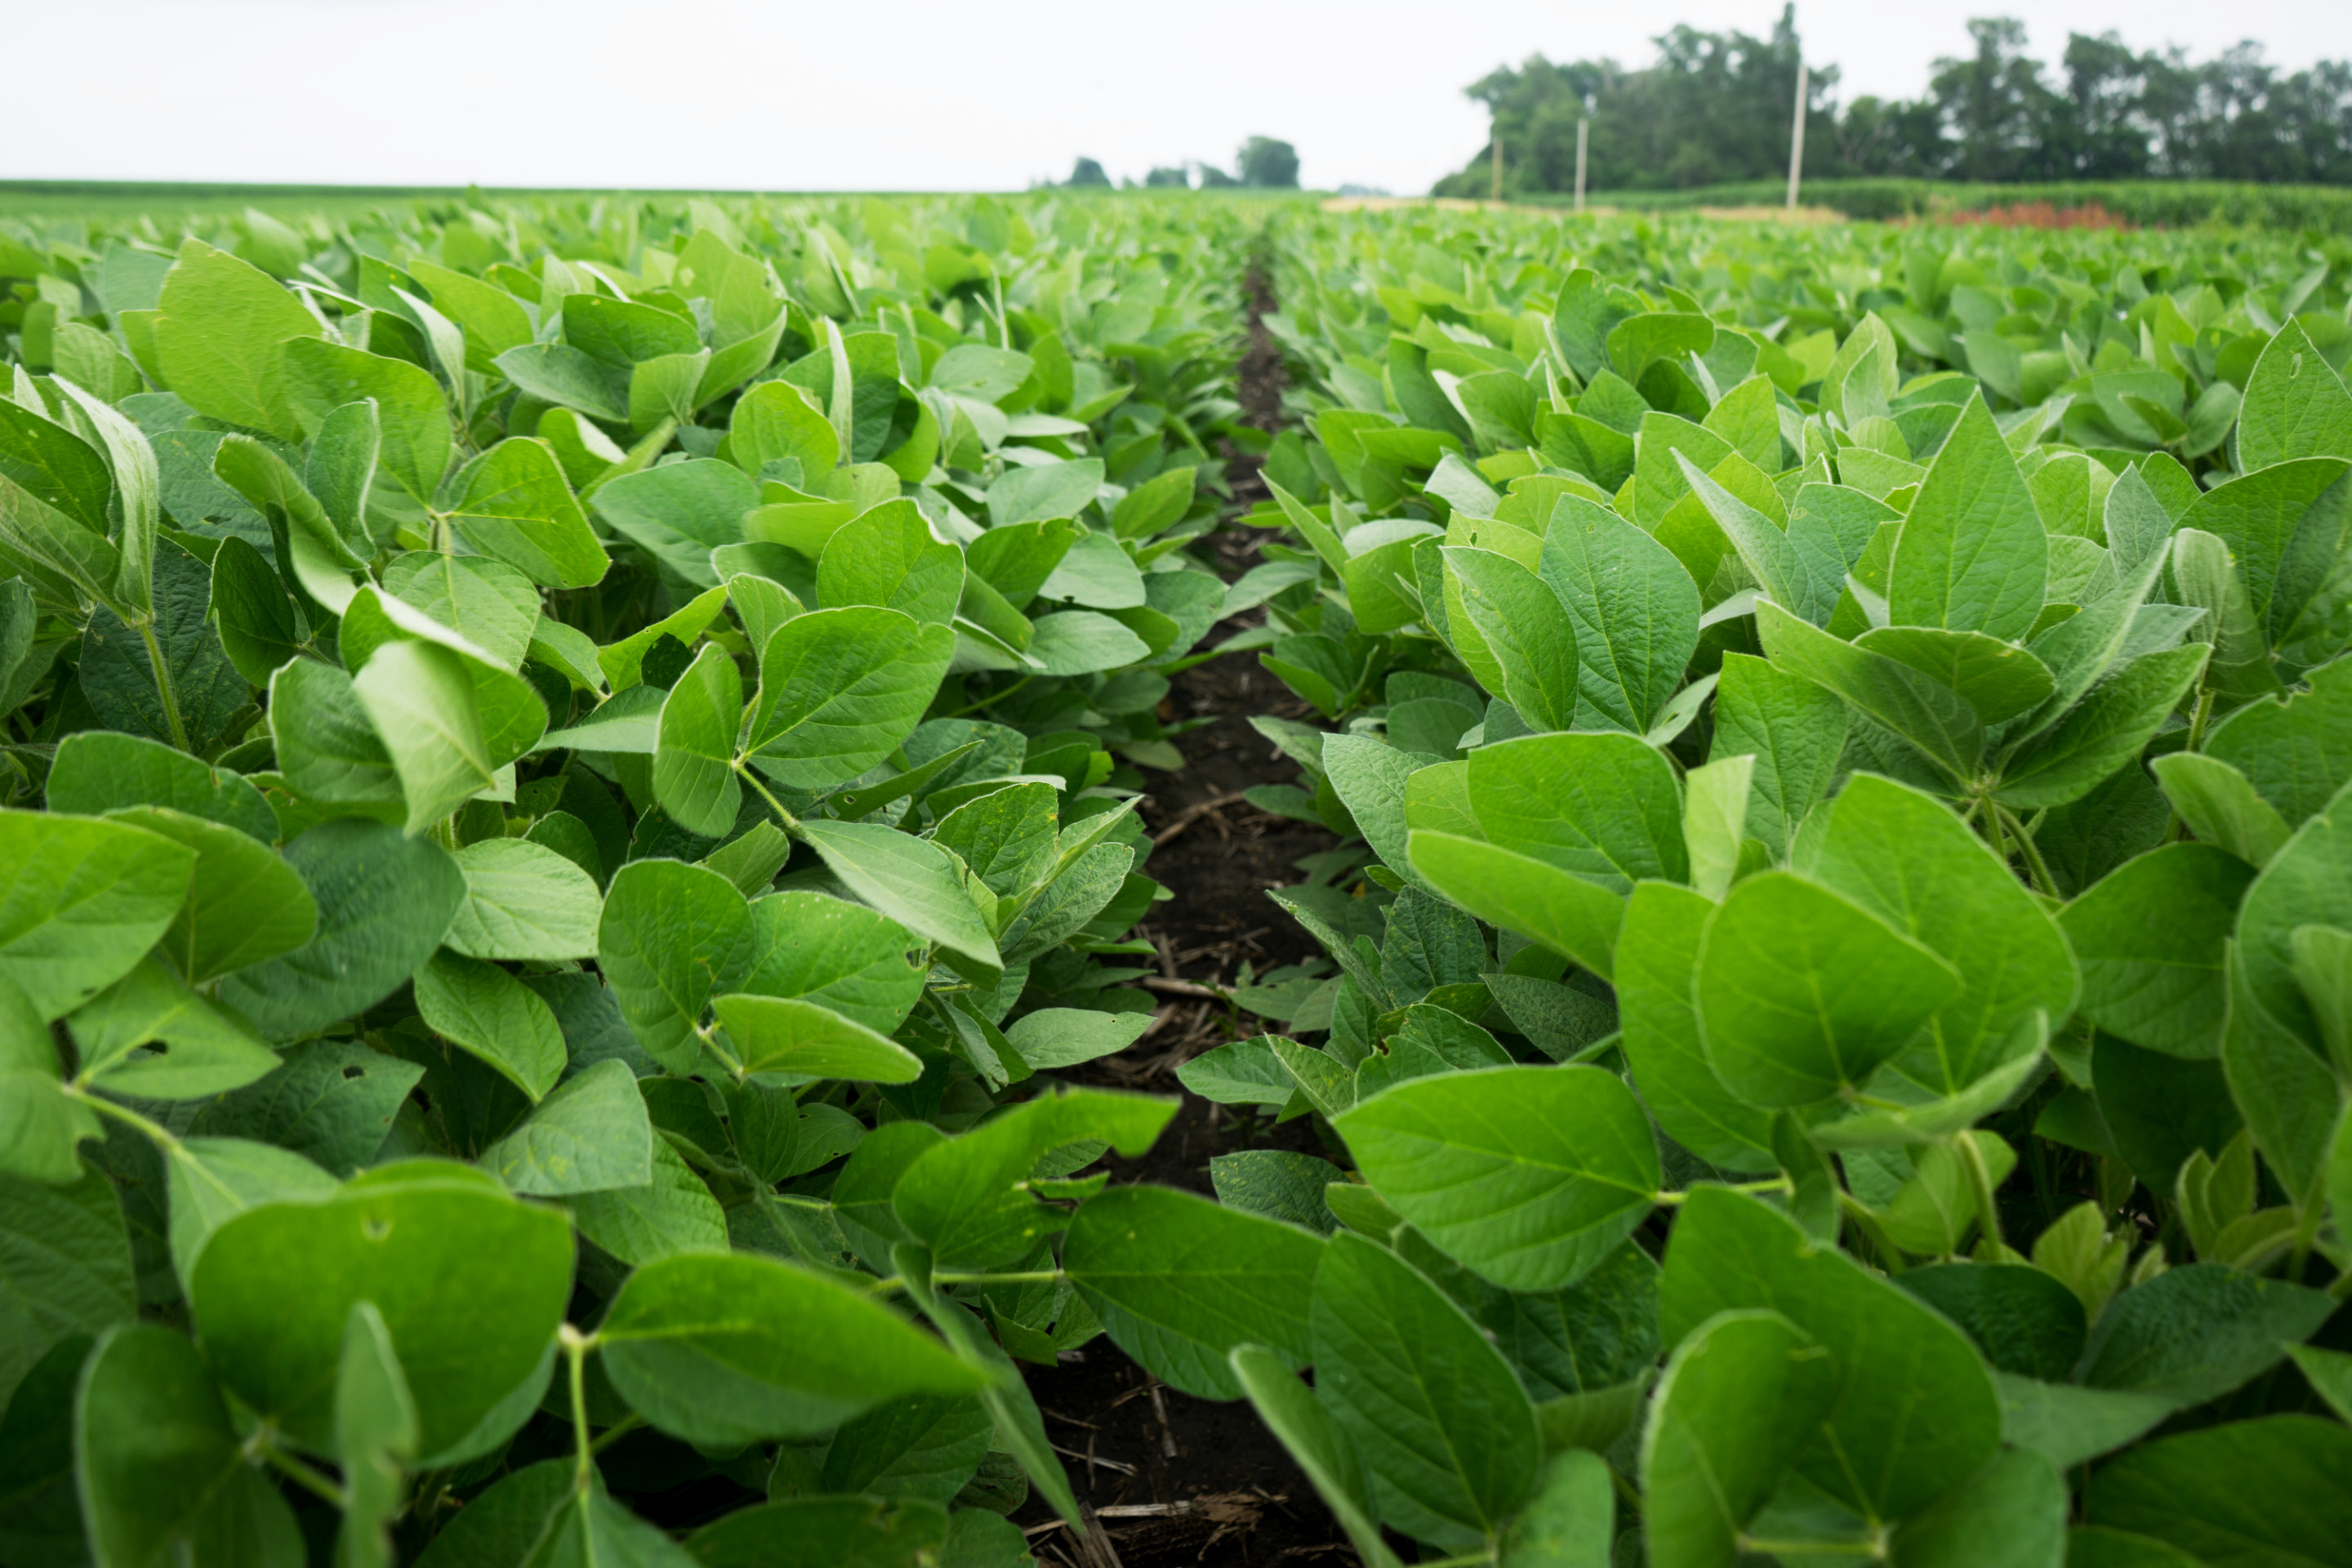 A row of young soybean plants under a pale blue sky